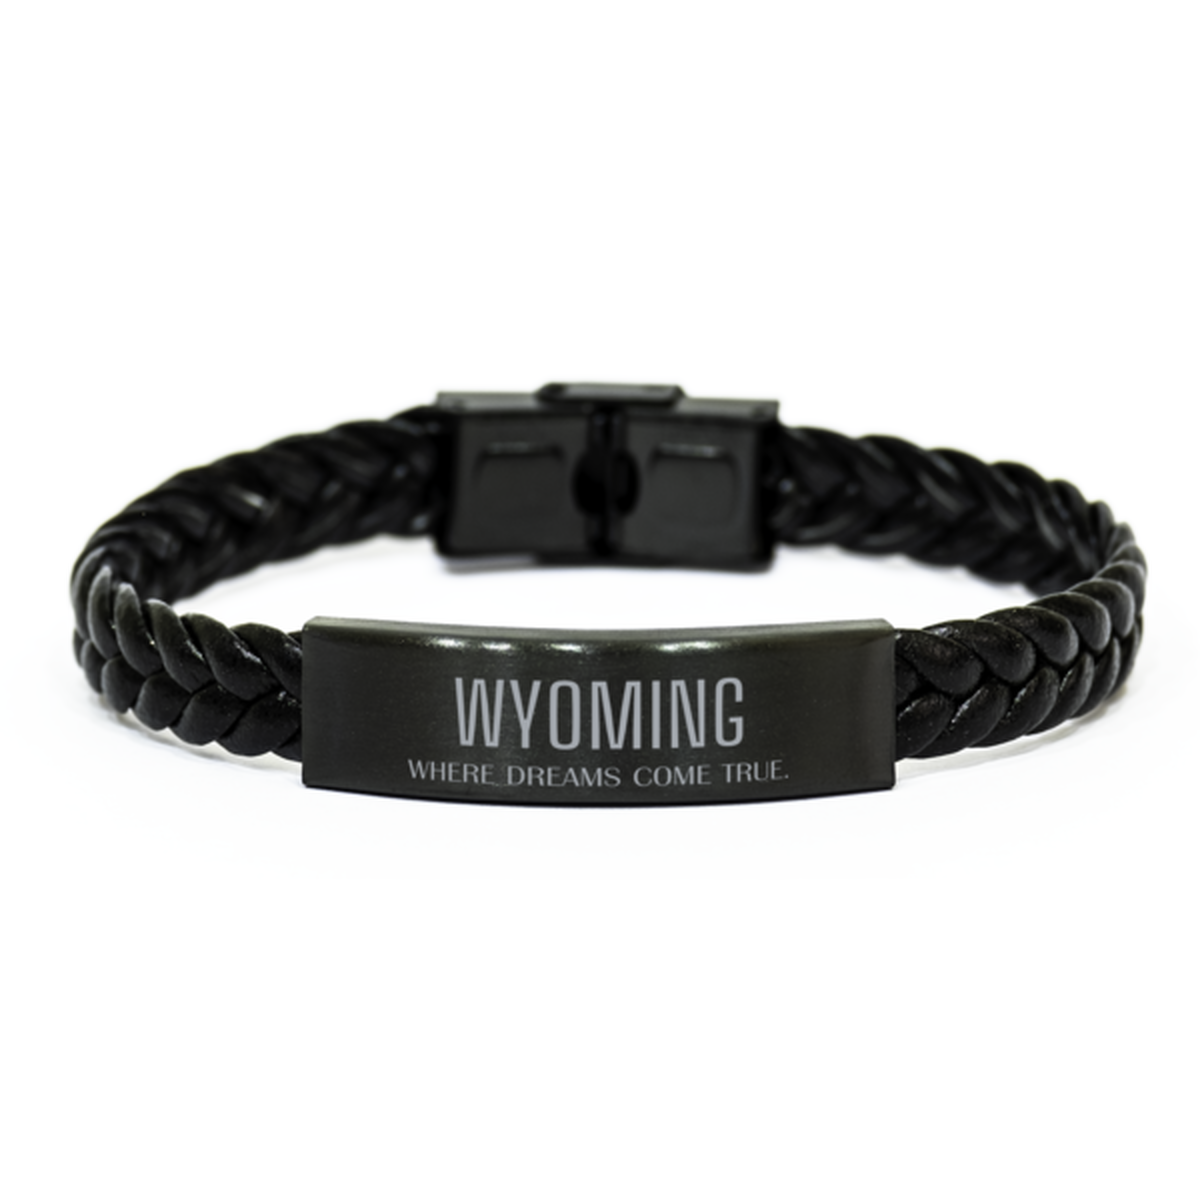 Love Wyoming State Braided Leather Bracelet, Wyoming Where dreams come true, Birthday Inspirational Gifts For Wyoming Men, Women, Friends